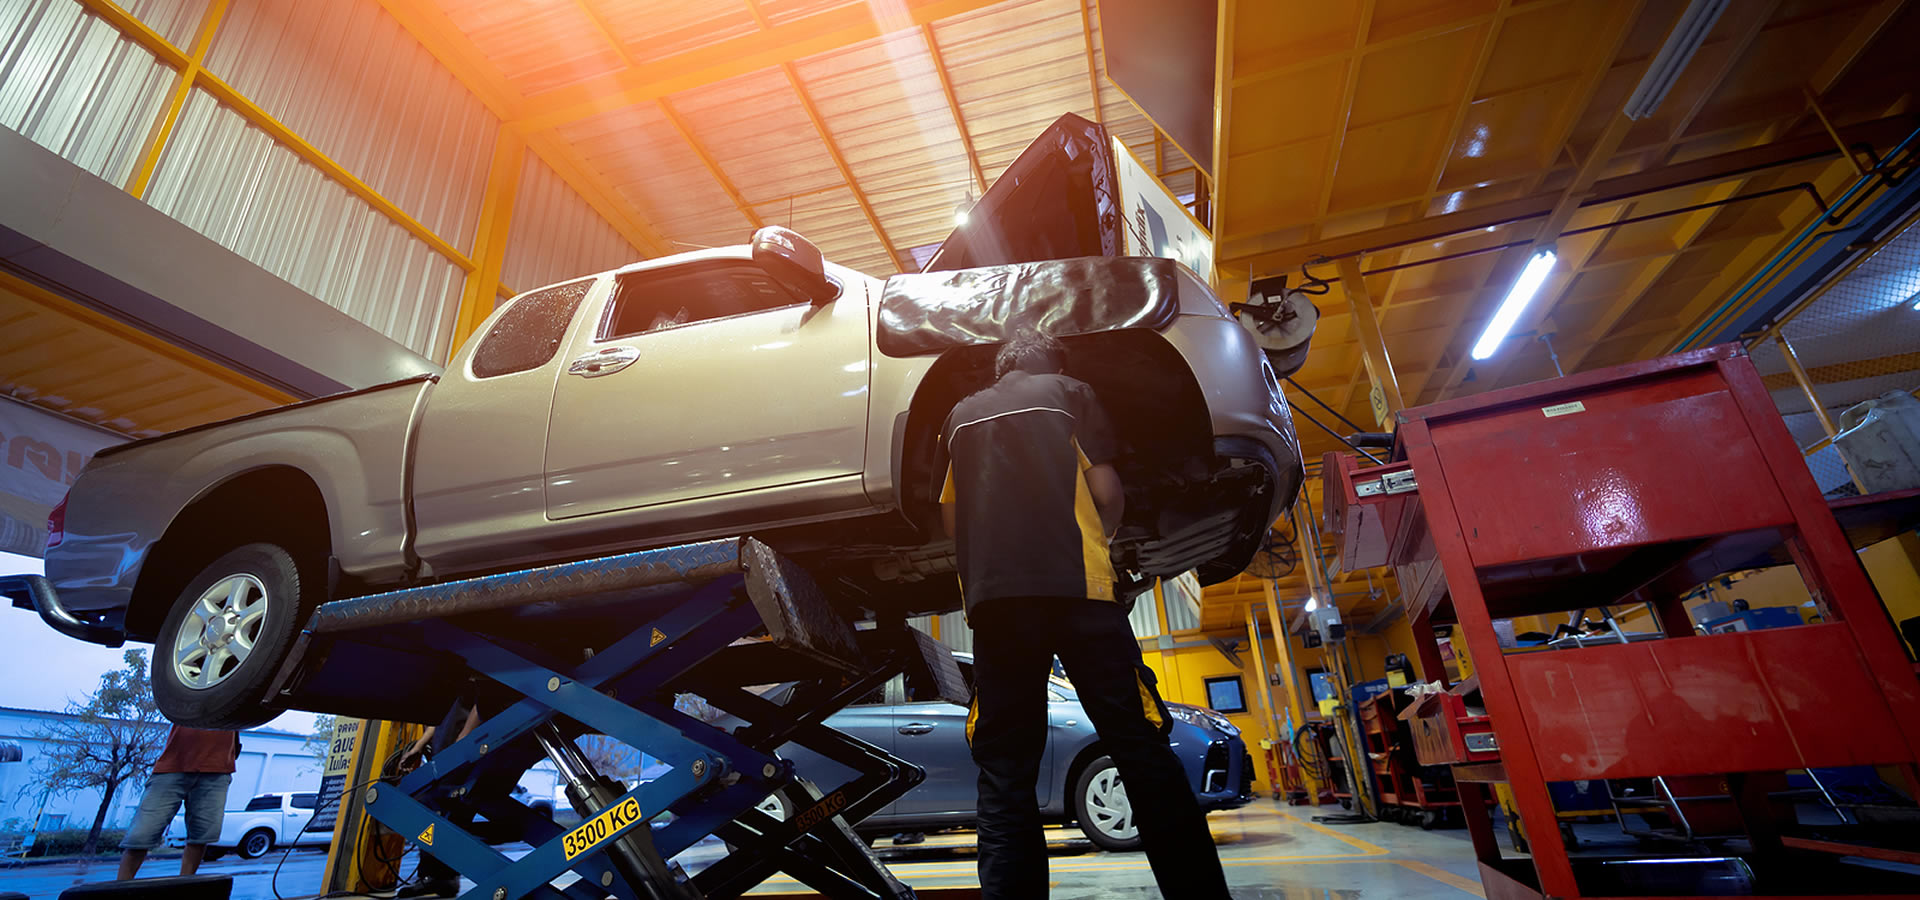 Top 12 Car Maintenance Tips for Longevity and Reliability